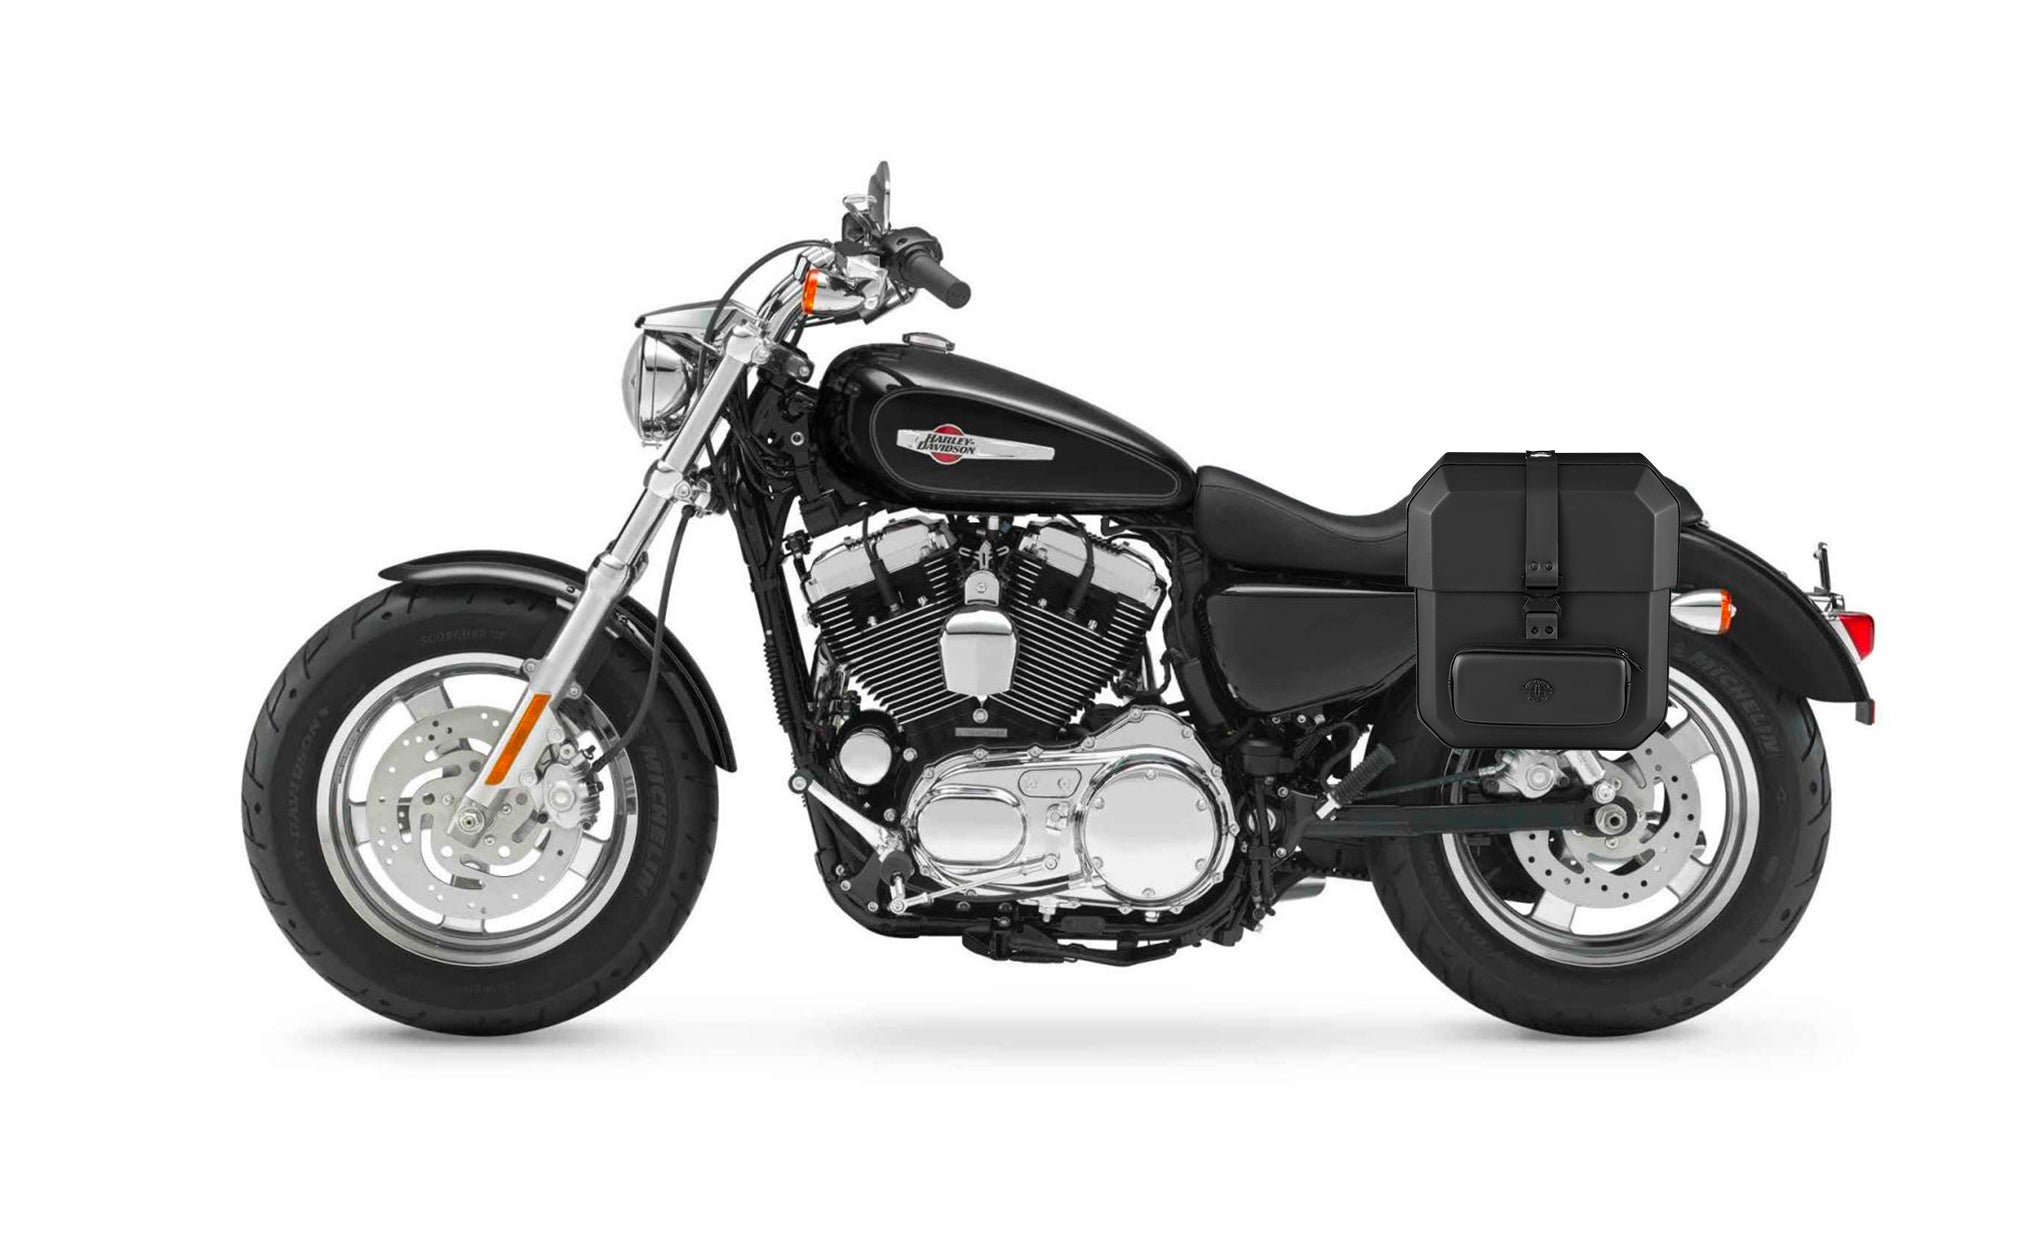 15L - Outlaw Quick Mount Medium Harley Sportster 1200 Low XL1200L Hard Solo Saddlebag (Left Only) @expand